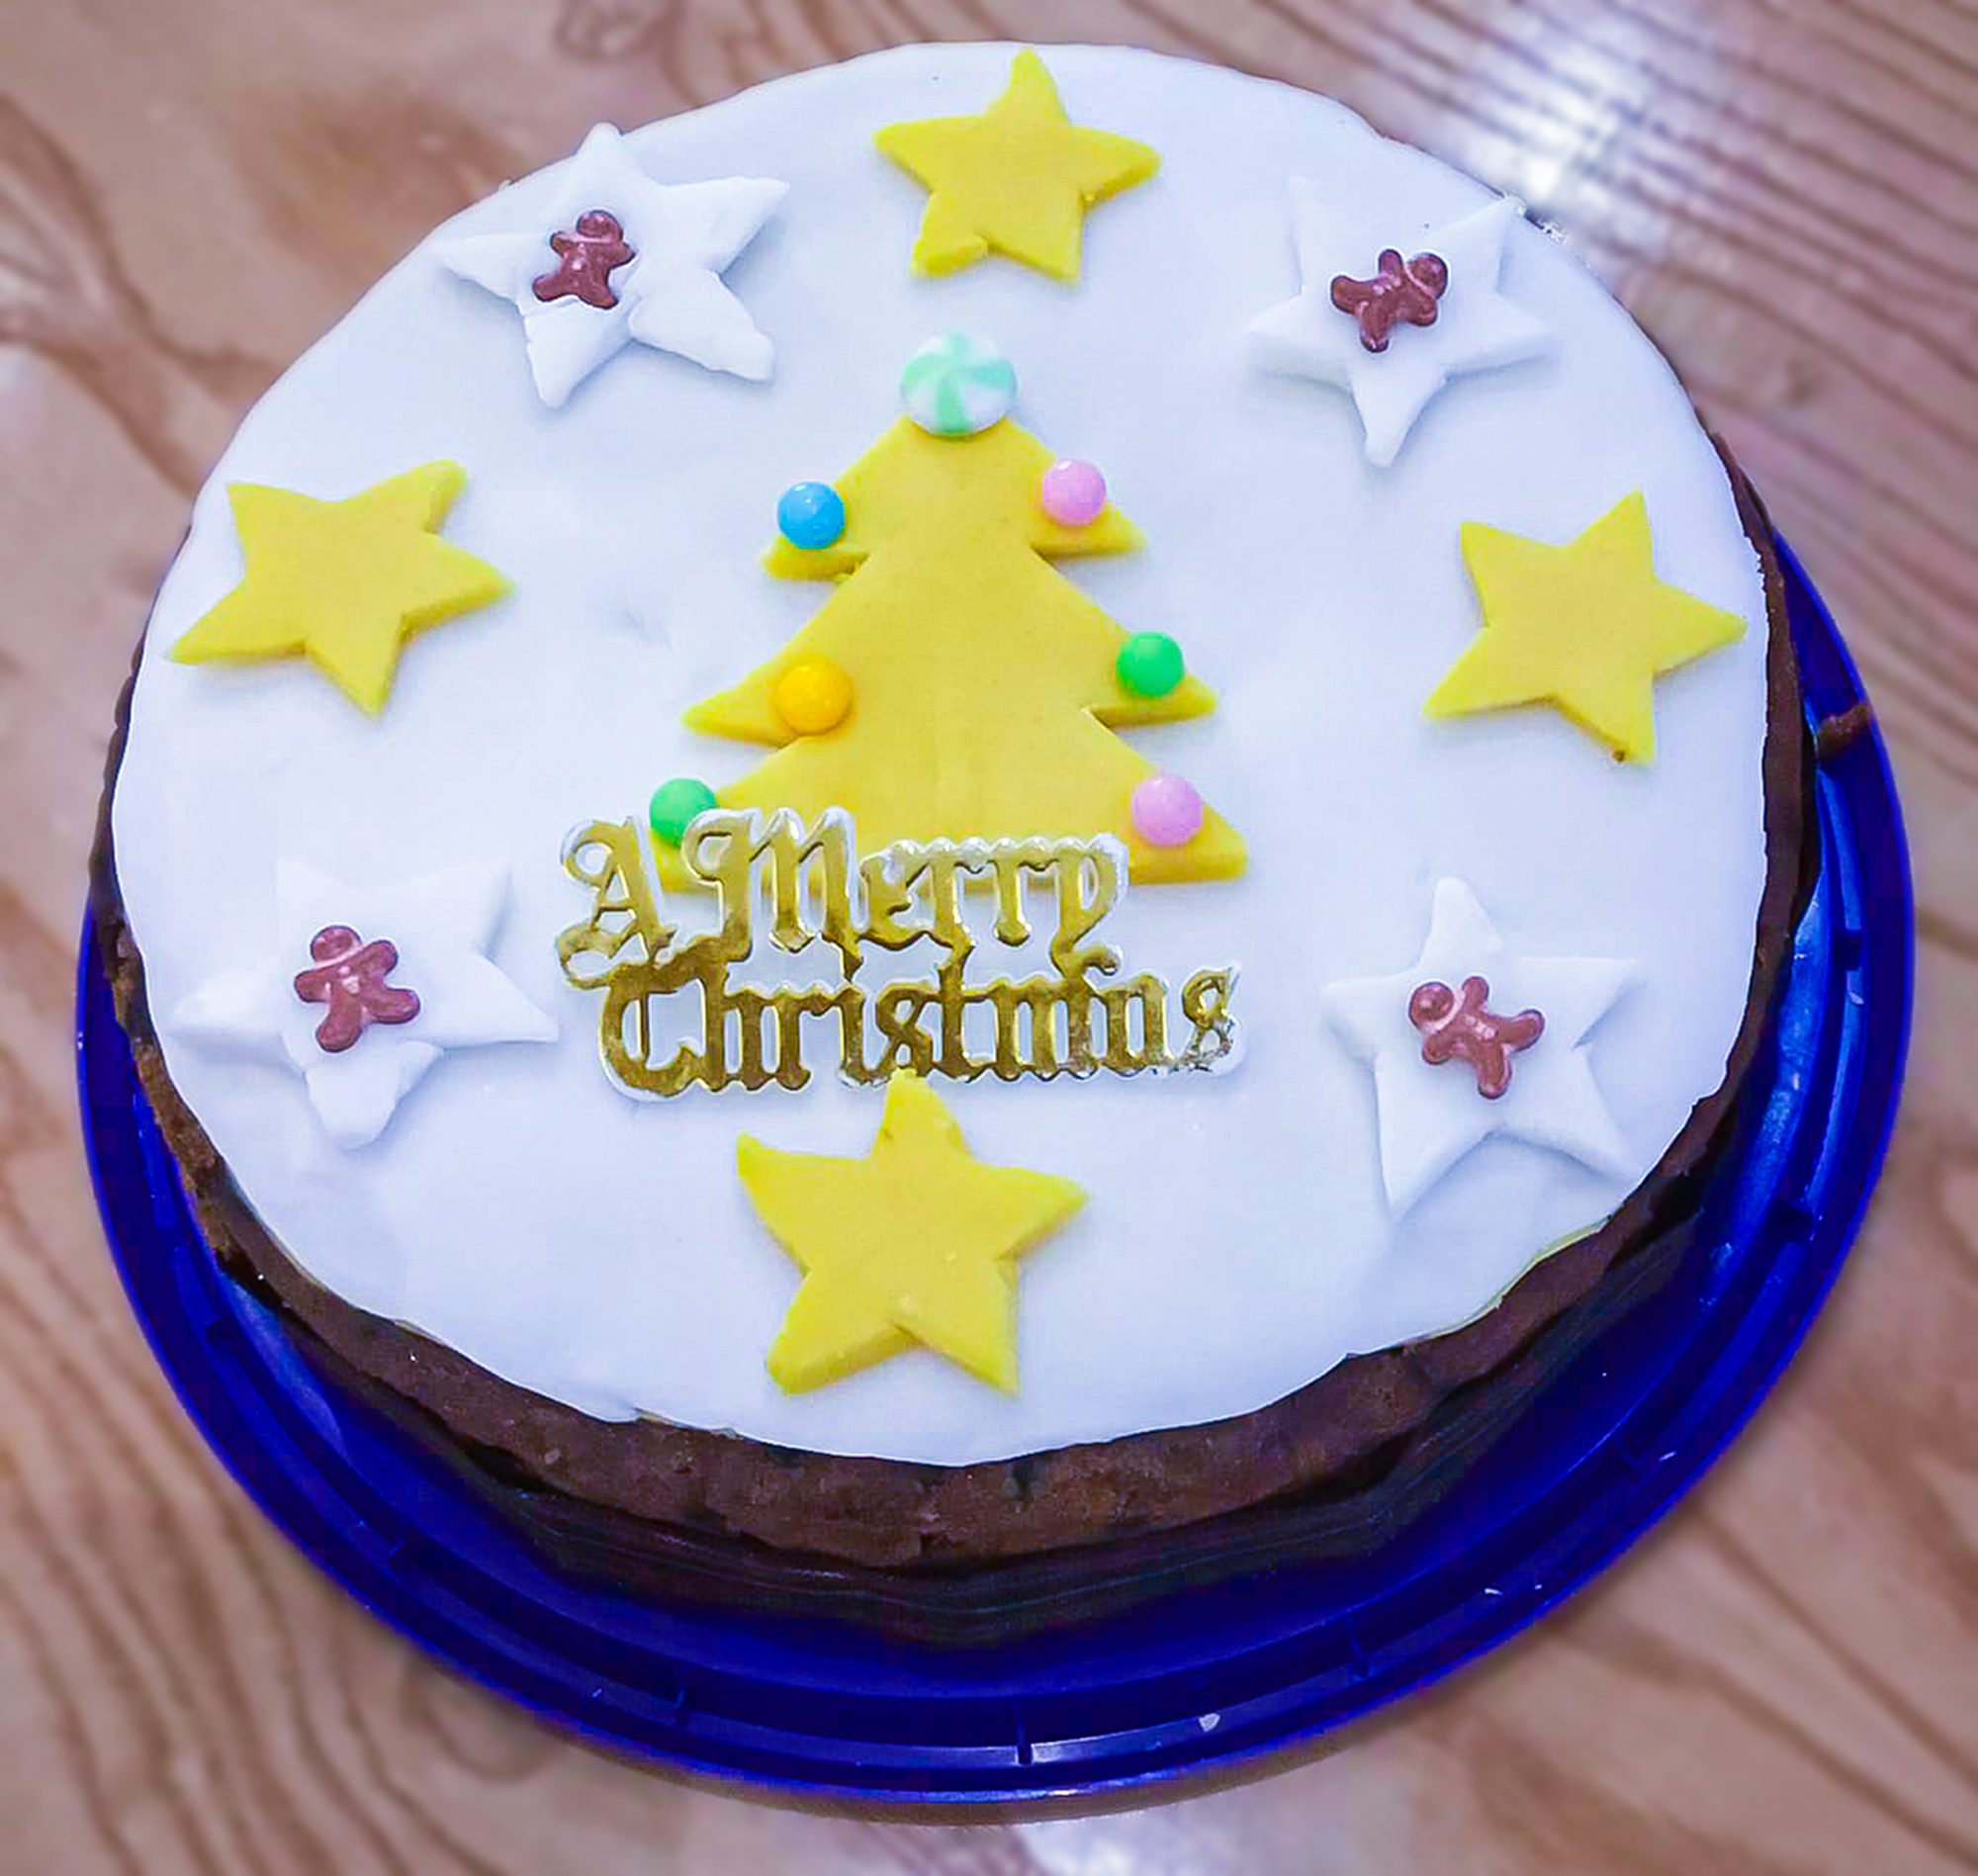 A Christmas cake made by day care clients.